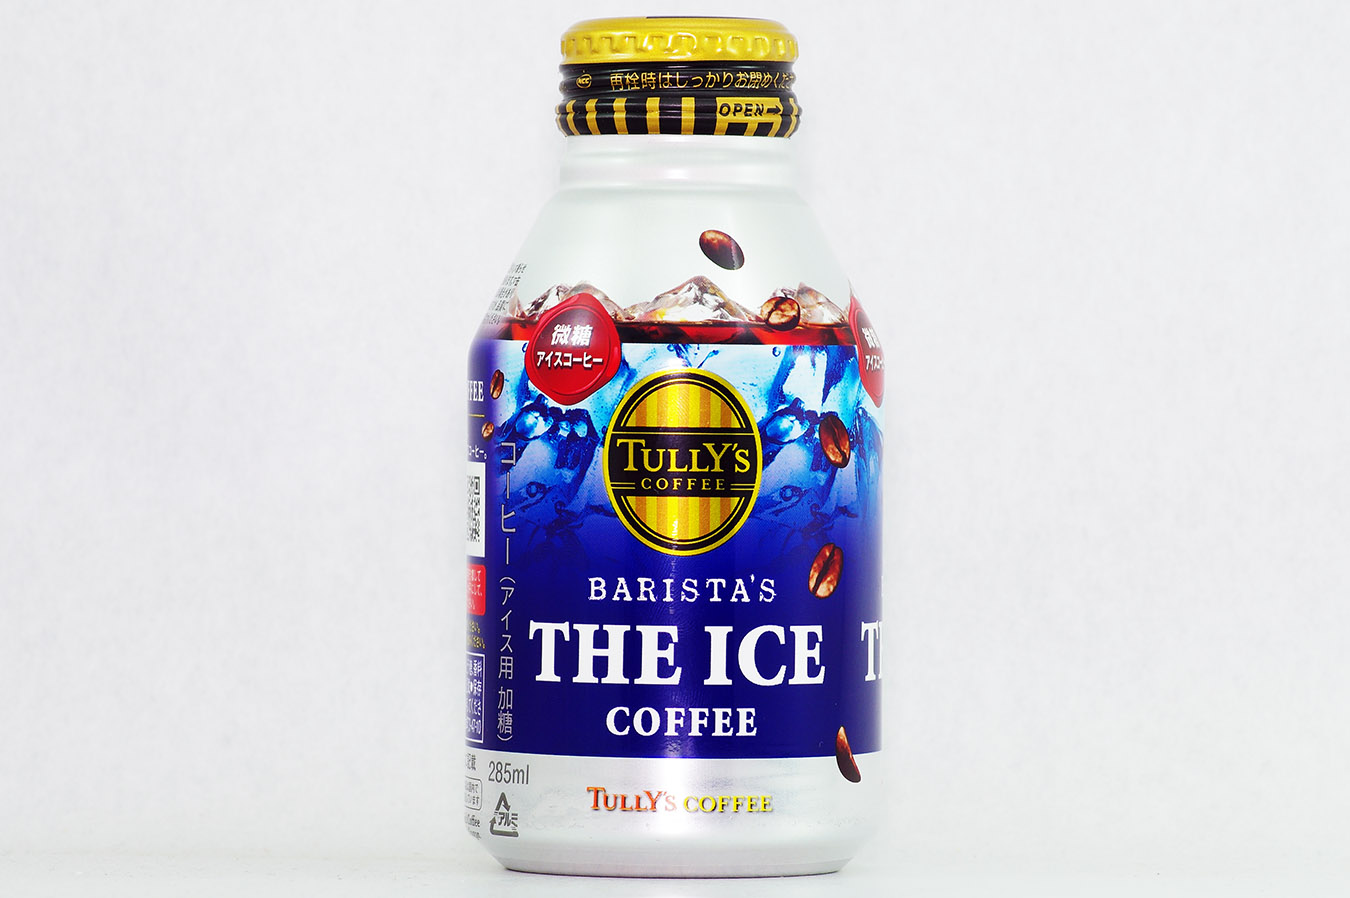 TULLY'S COFFEE BARISTA'S THE ICE COFFEE 2016年3月